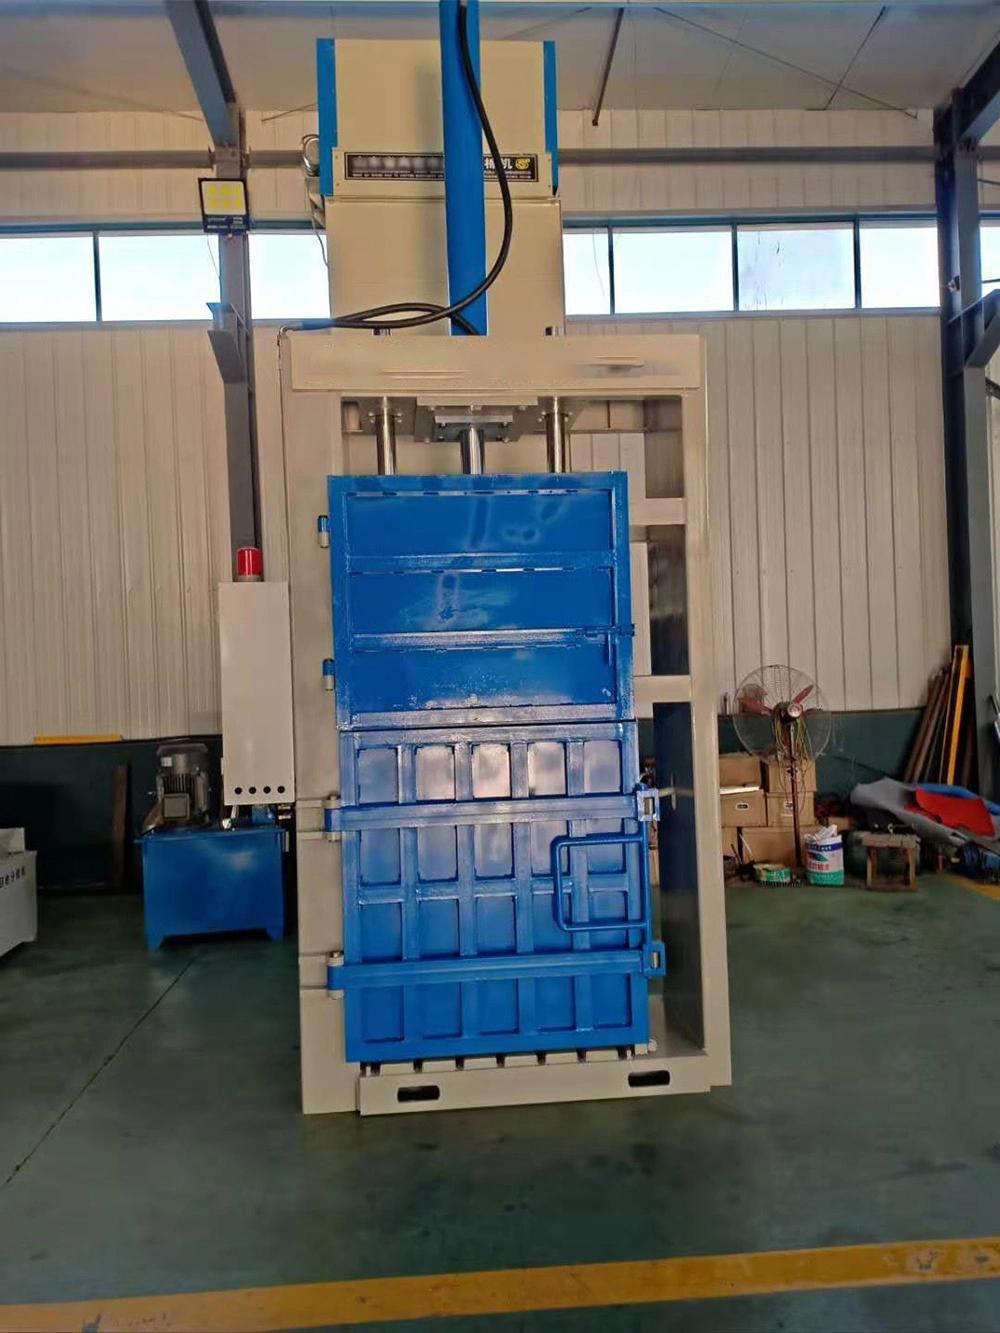 Best Selling Vertical U-Shaped Pressure Balance System Baler Hydraulic Press Waste Plastic Film Packaging Machine Factory Price Baler for Recycling Industry